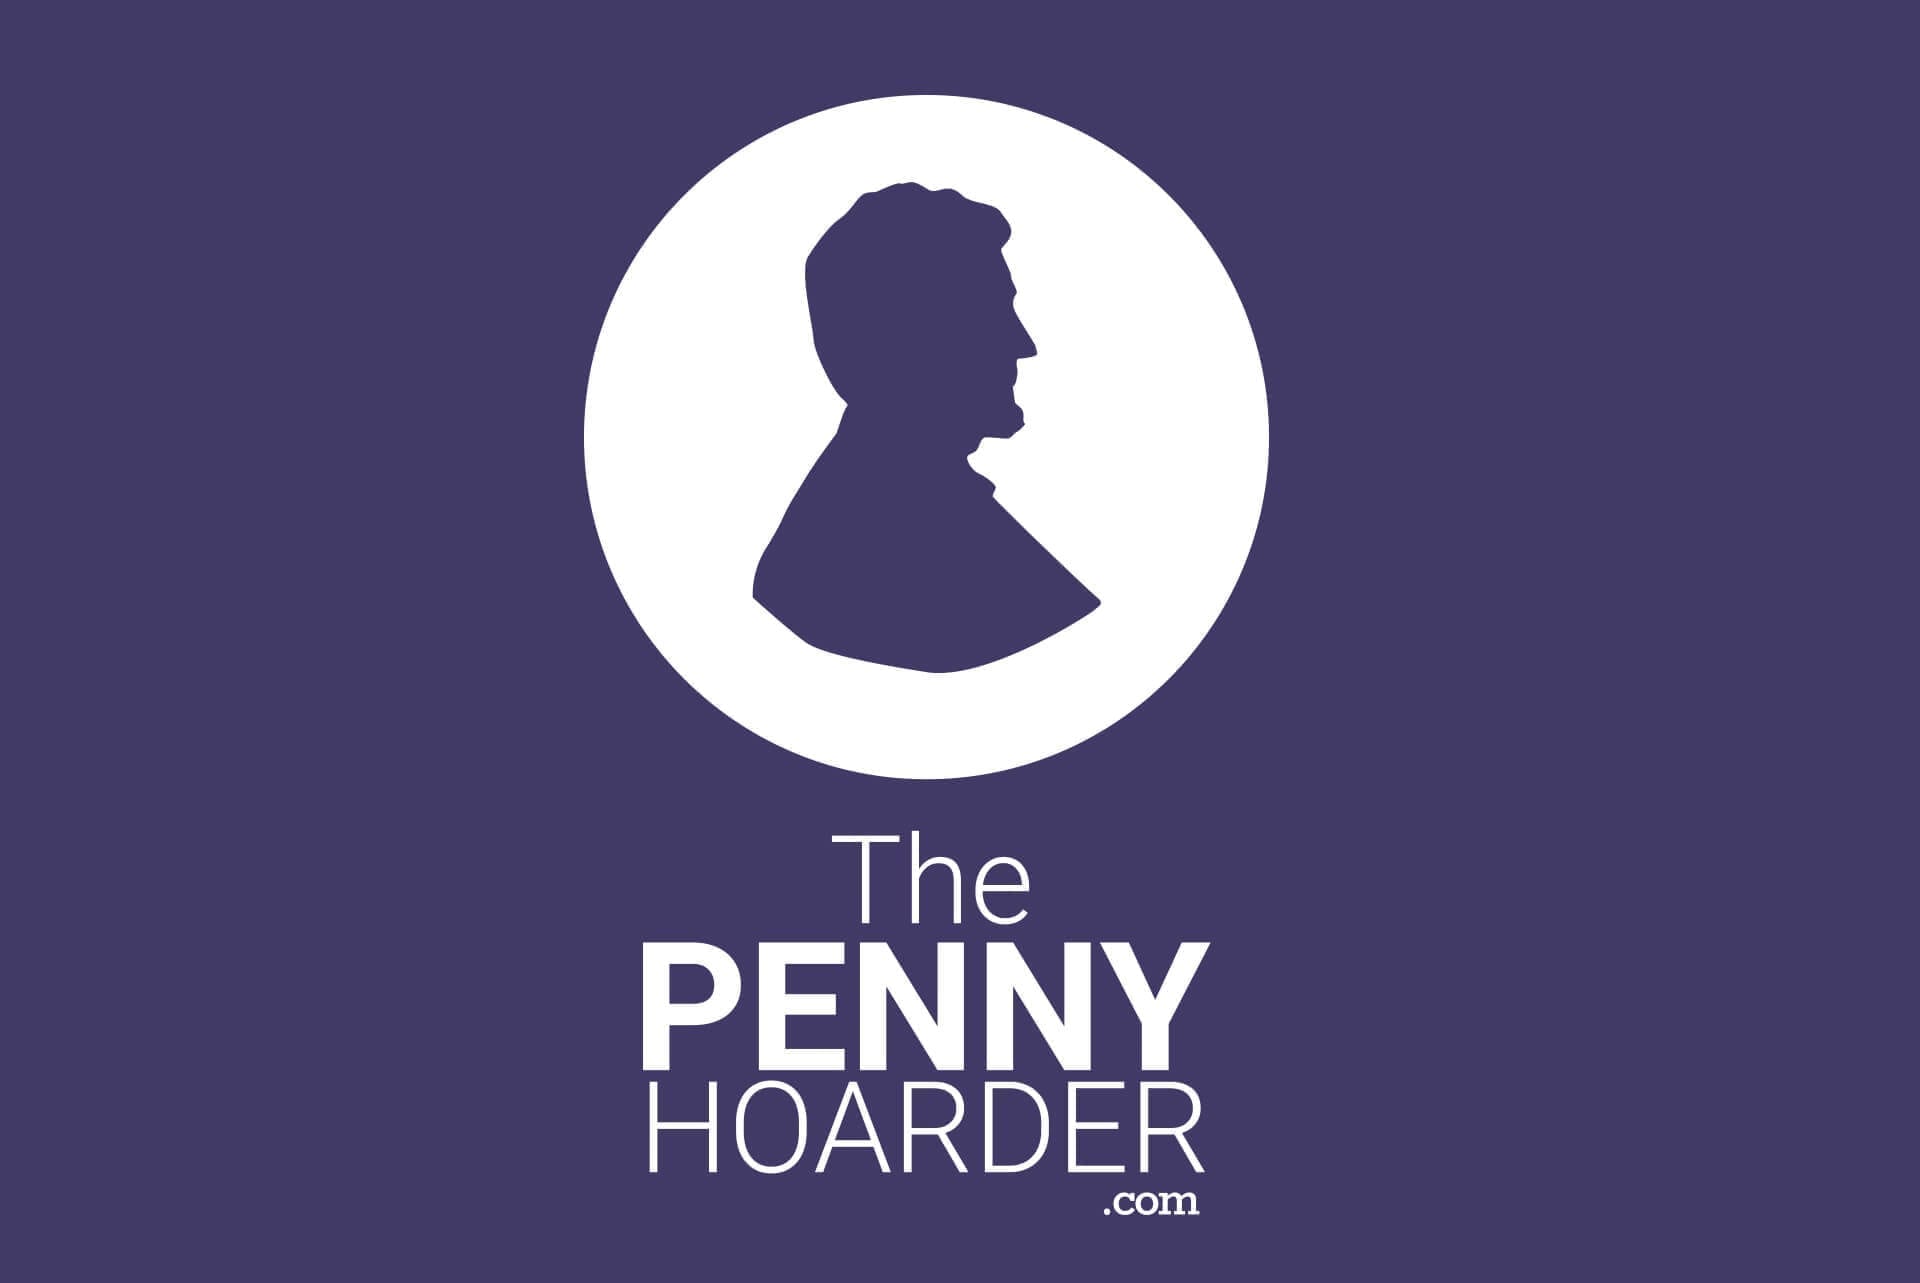 The Penny Hoarder